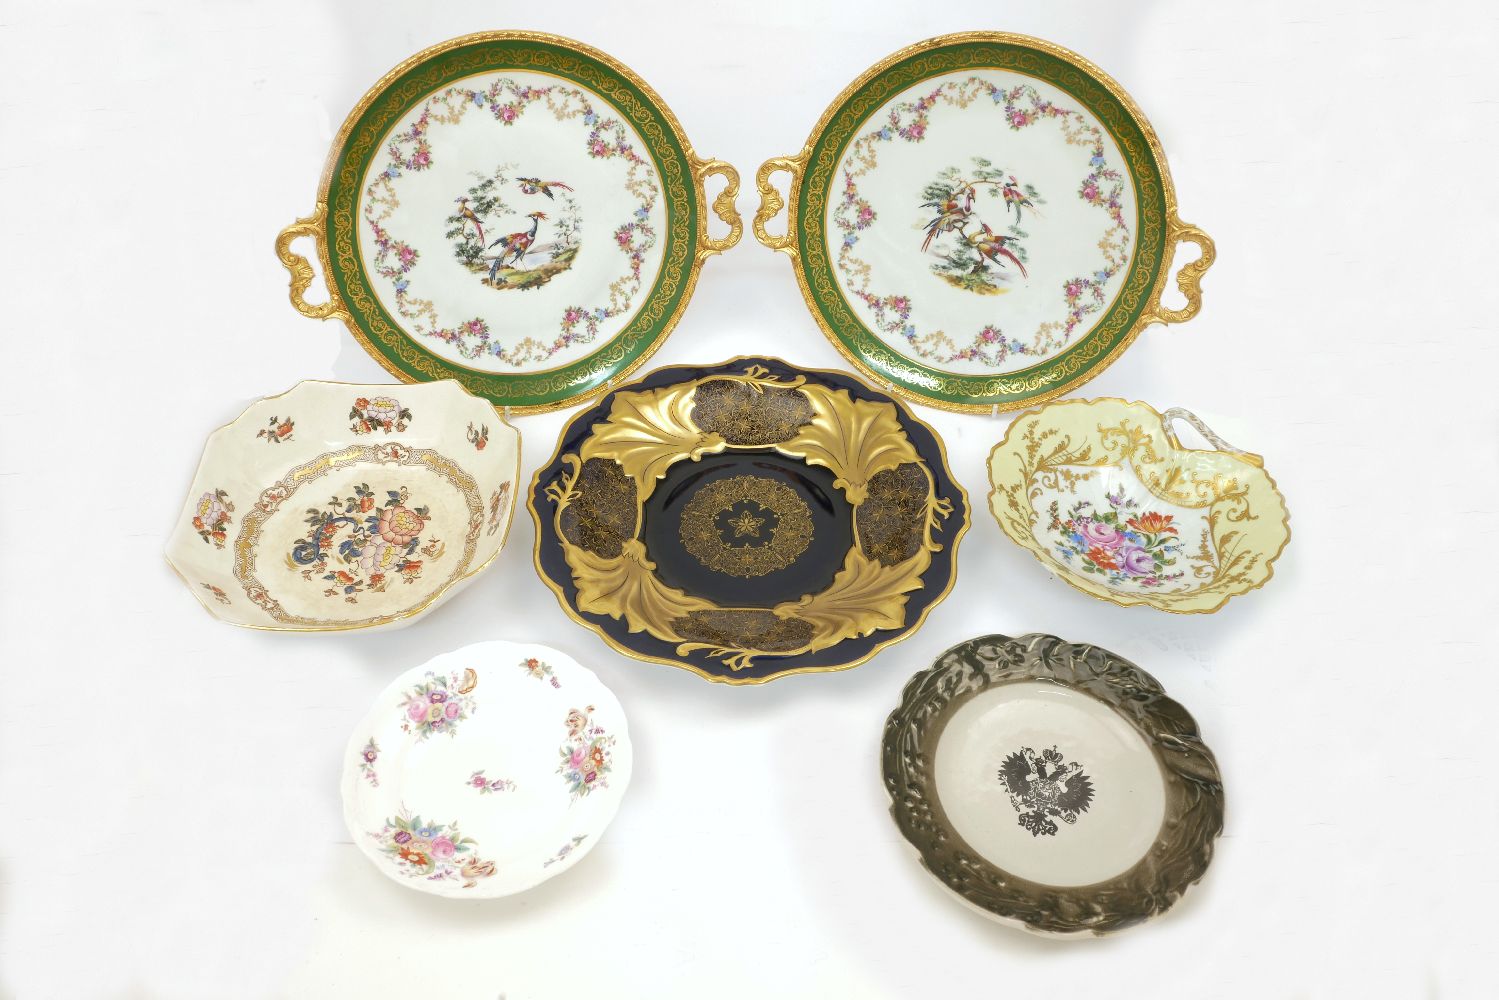 A French porcelain gilt mounted Limoges tazza, together with a similar gilt metal mounted dish and a